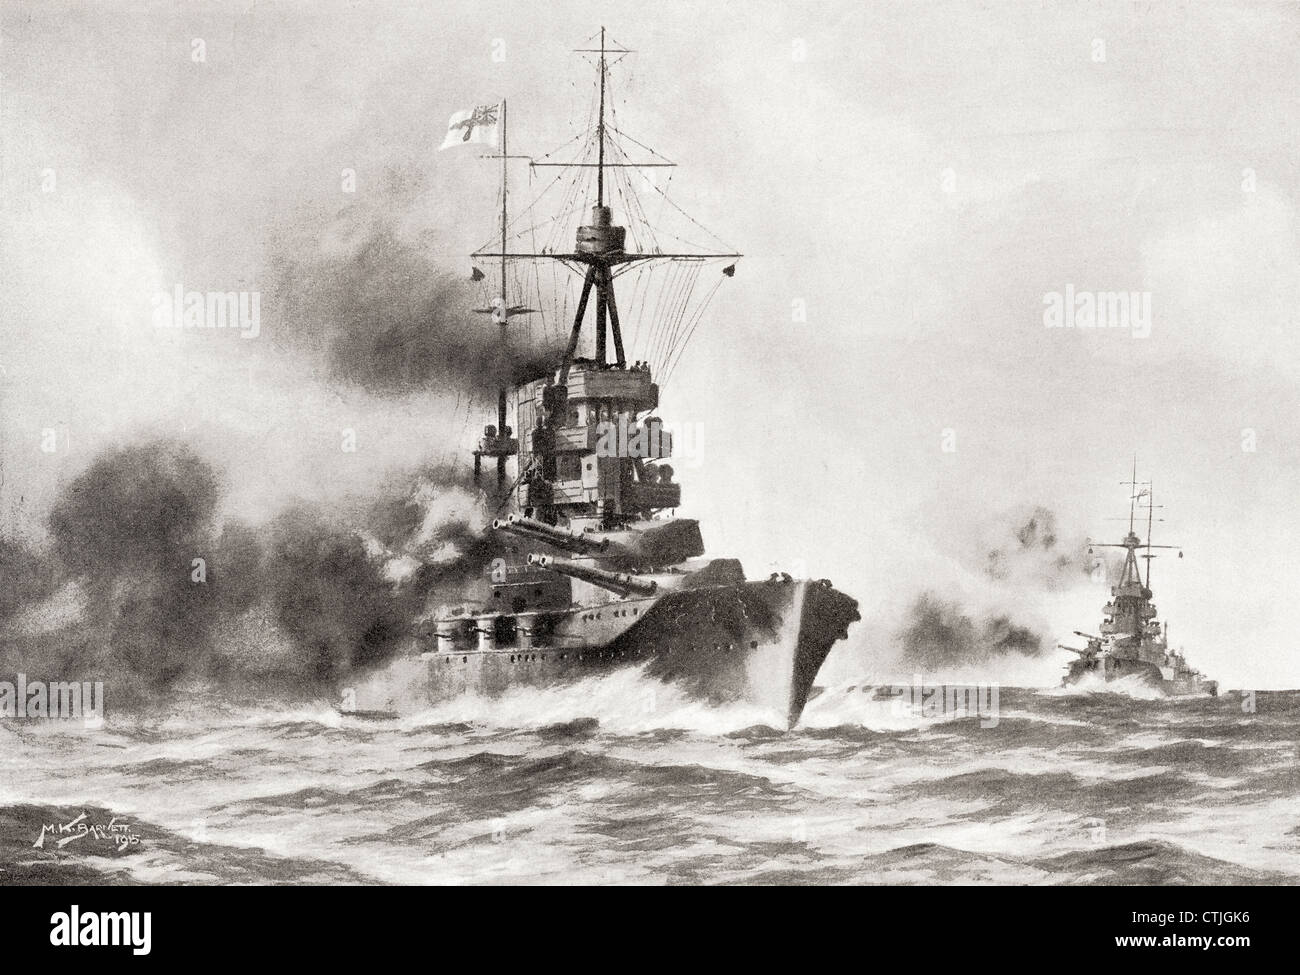 Queen Elizabeth class warships during World War I. From The Year 1916 Illustrated. Stock Photo